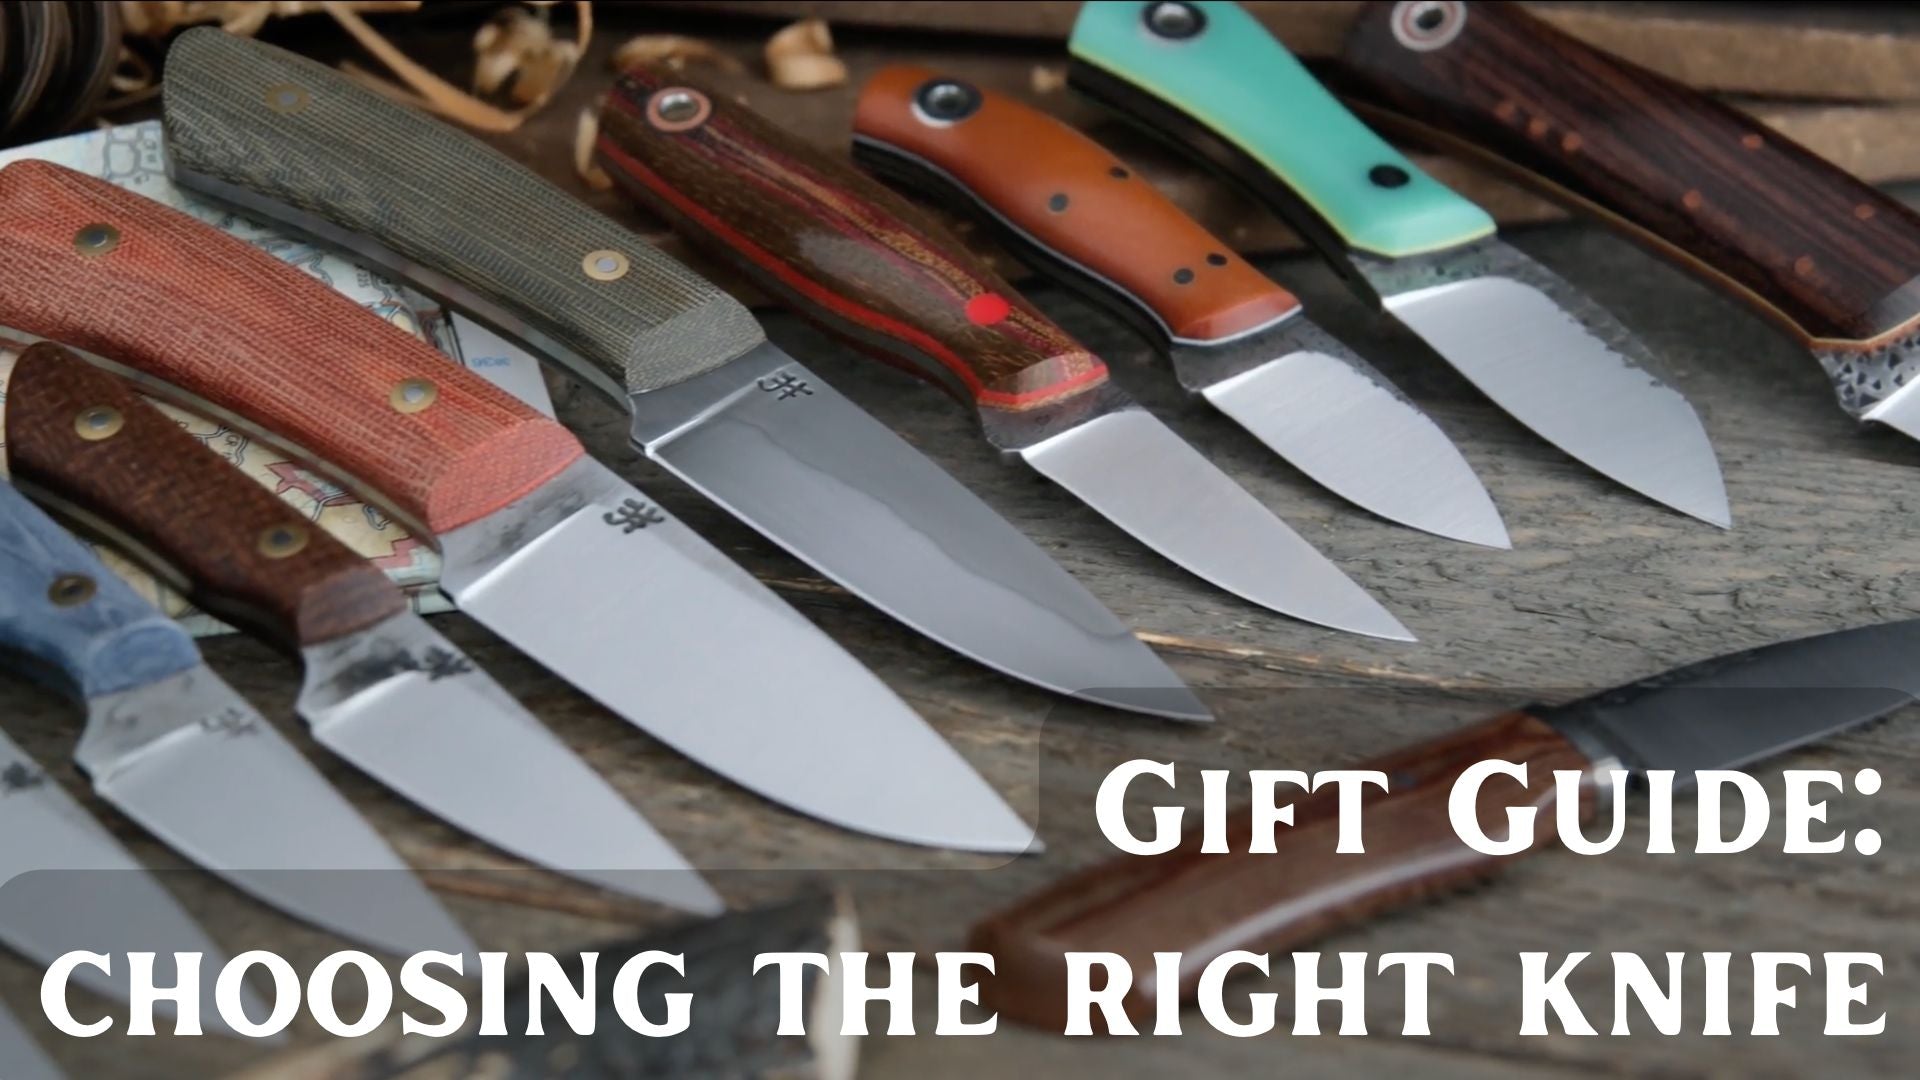 Holiday Gift Guide: How to Choose a Knife to Buy